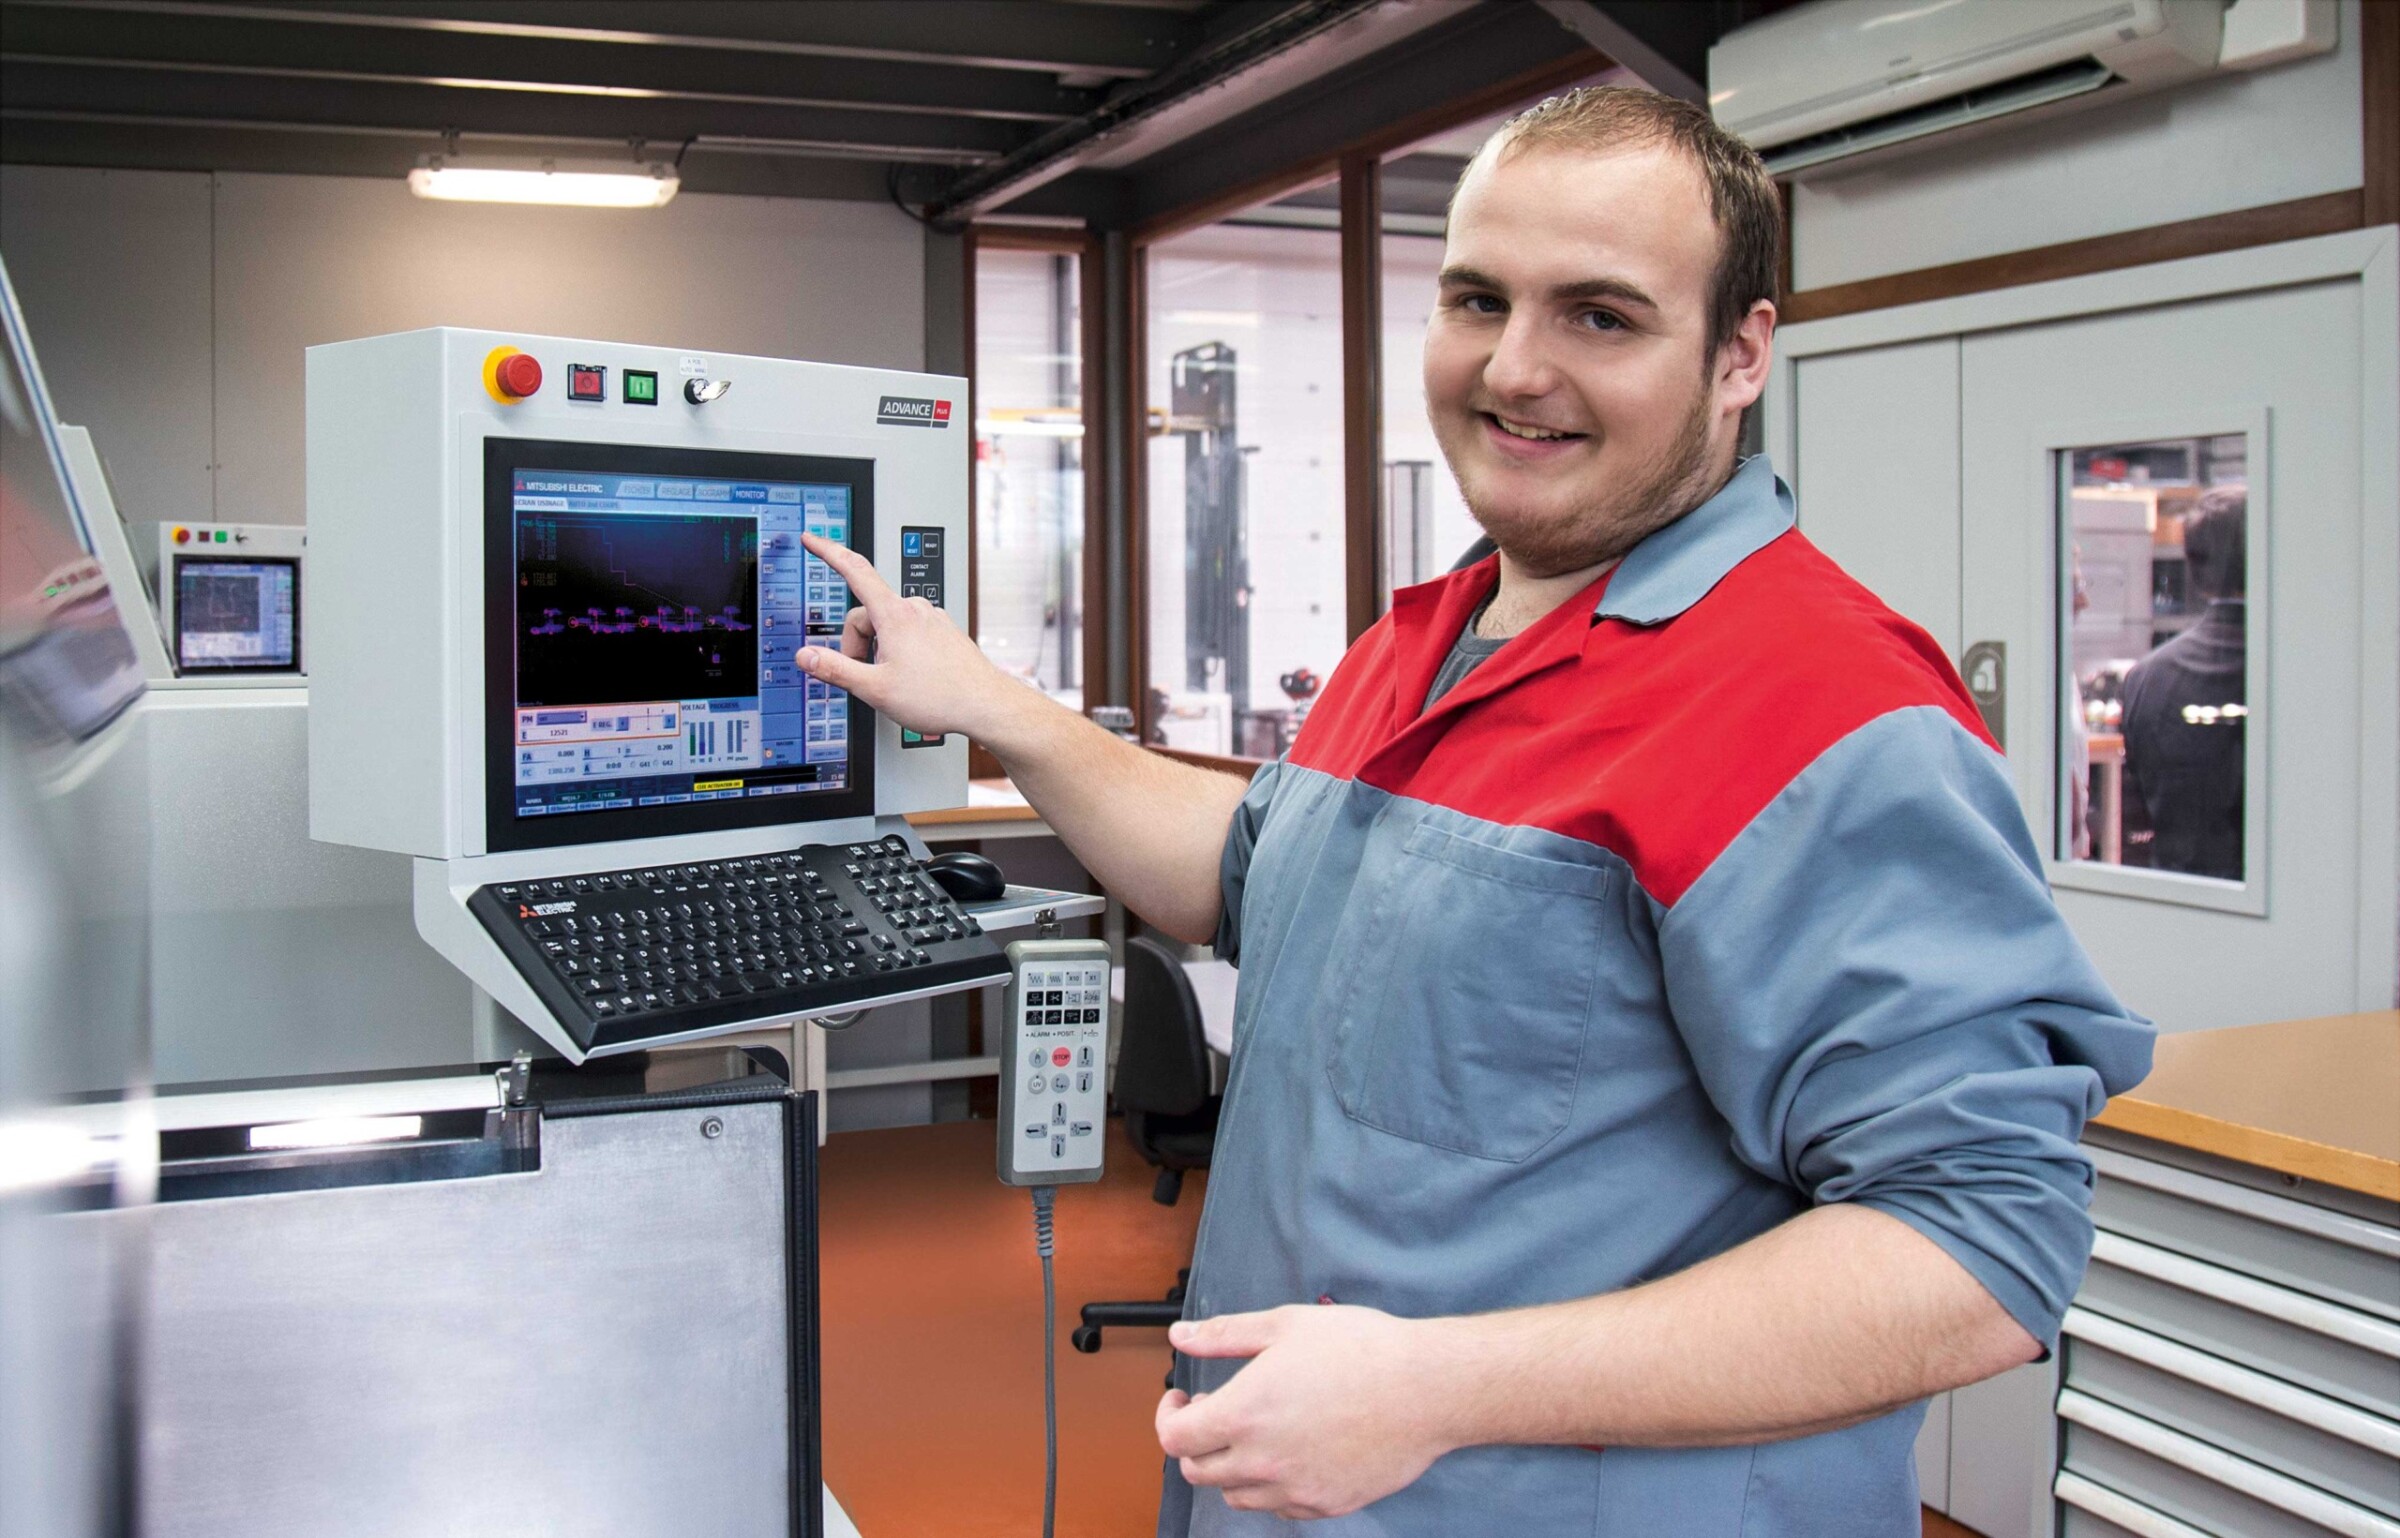 Since the wire-cutting machines from Mitsubishi Electric are easy to operate and highly intuitive, the technicians of ITB Innovation – Étienne Racine here in the ­picture – only needed a few days of training to fully master machine operation.